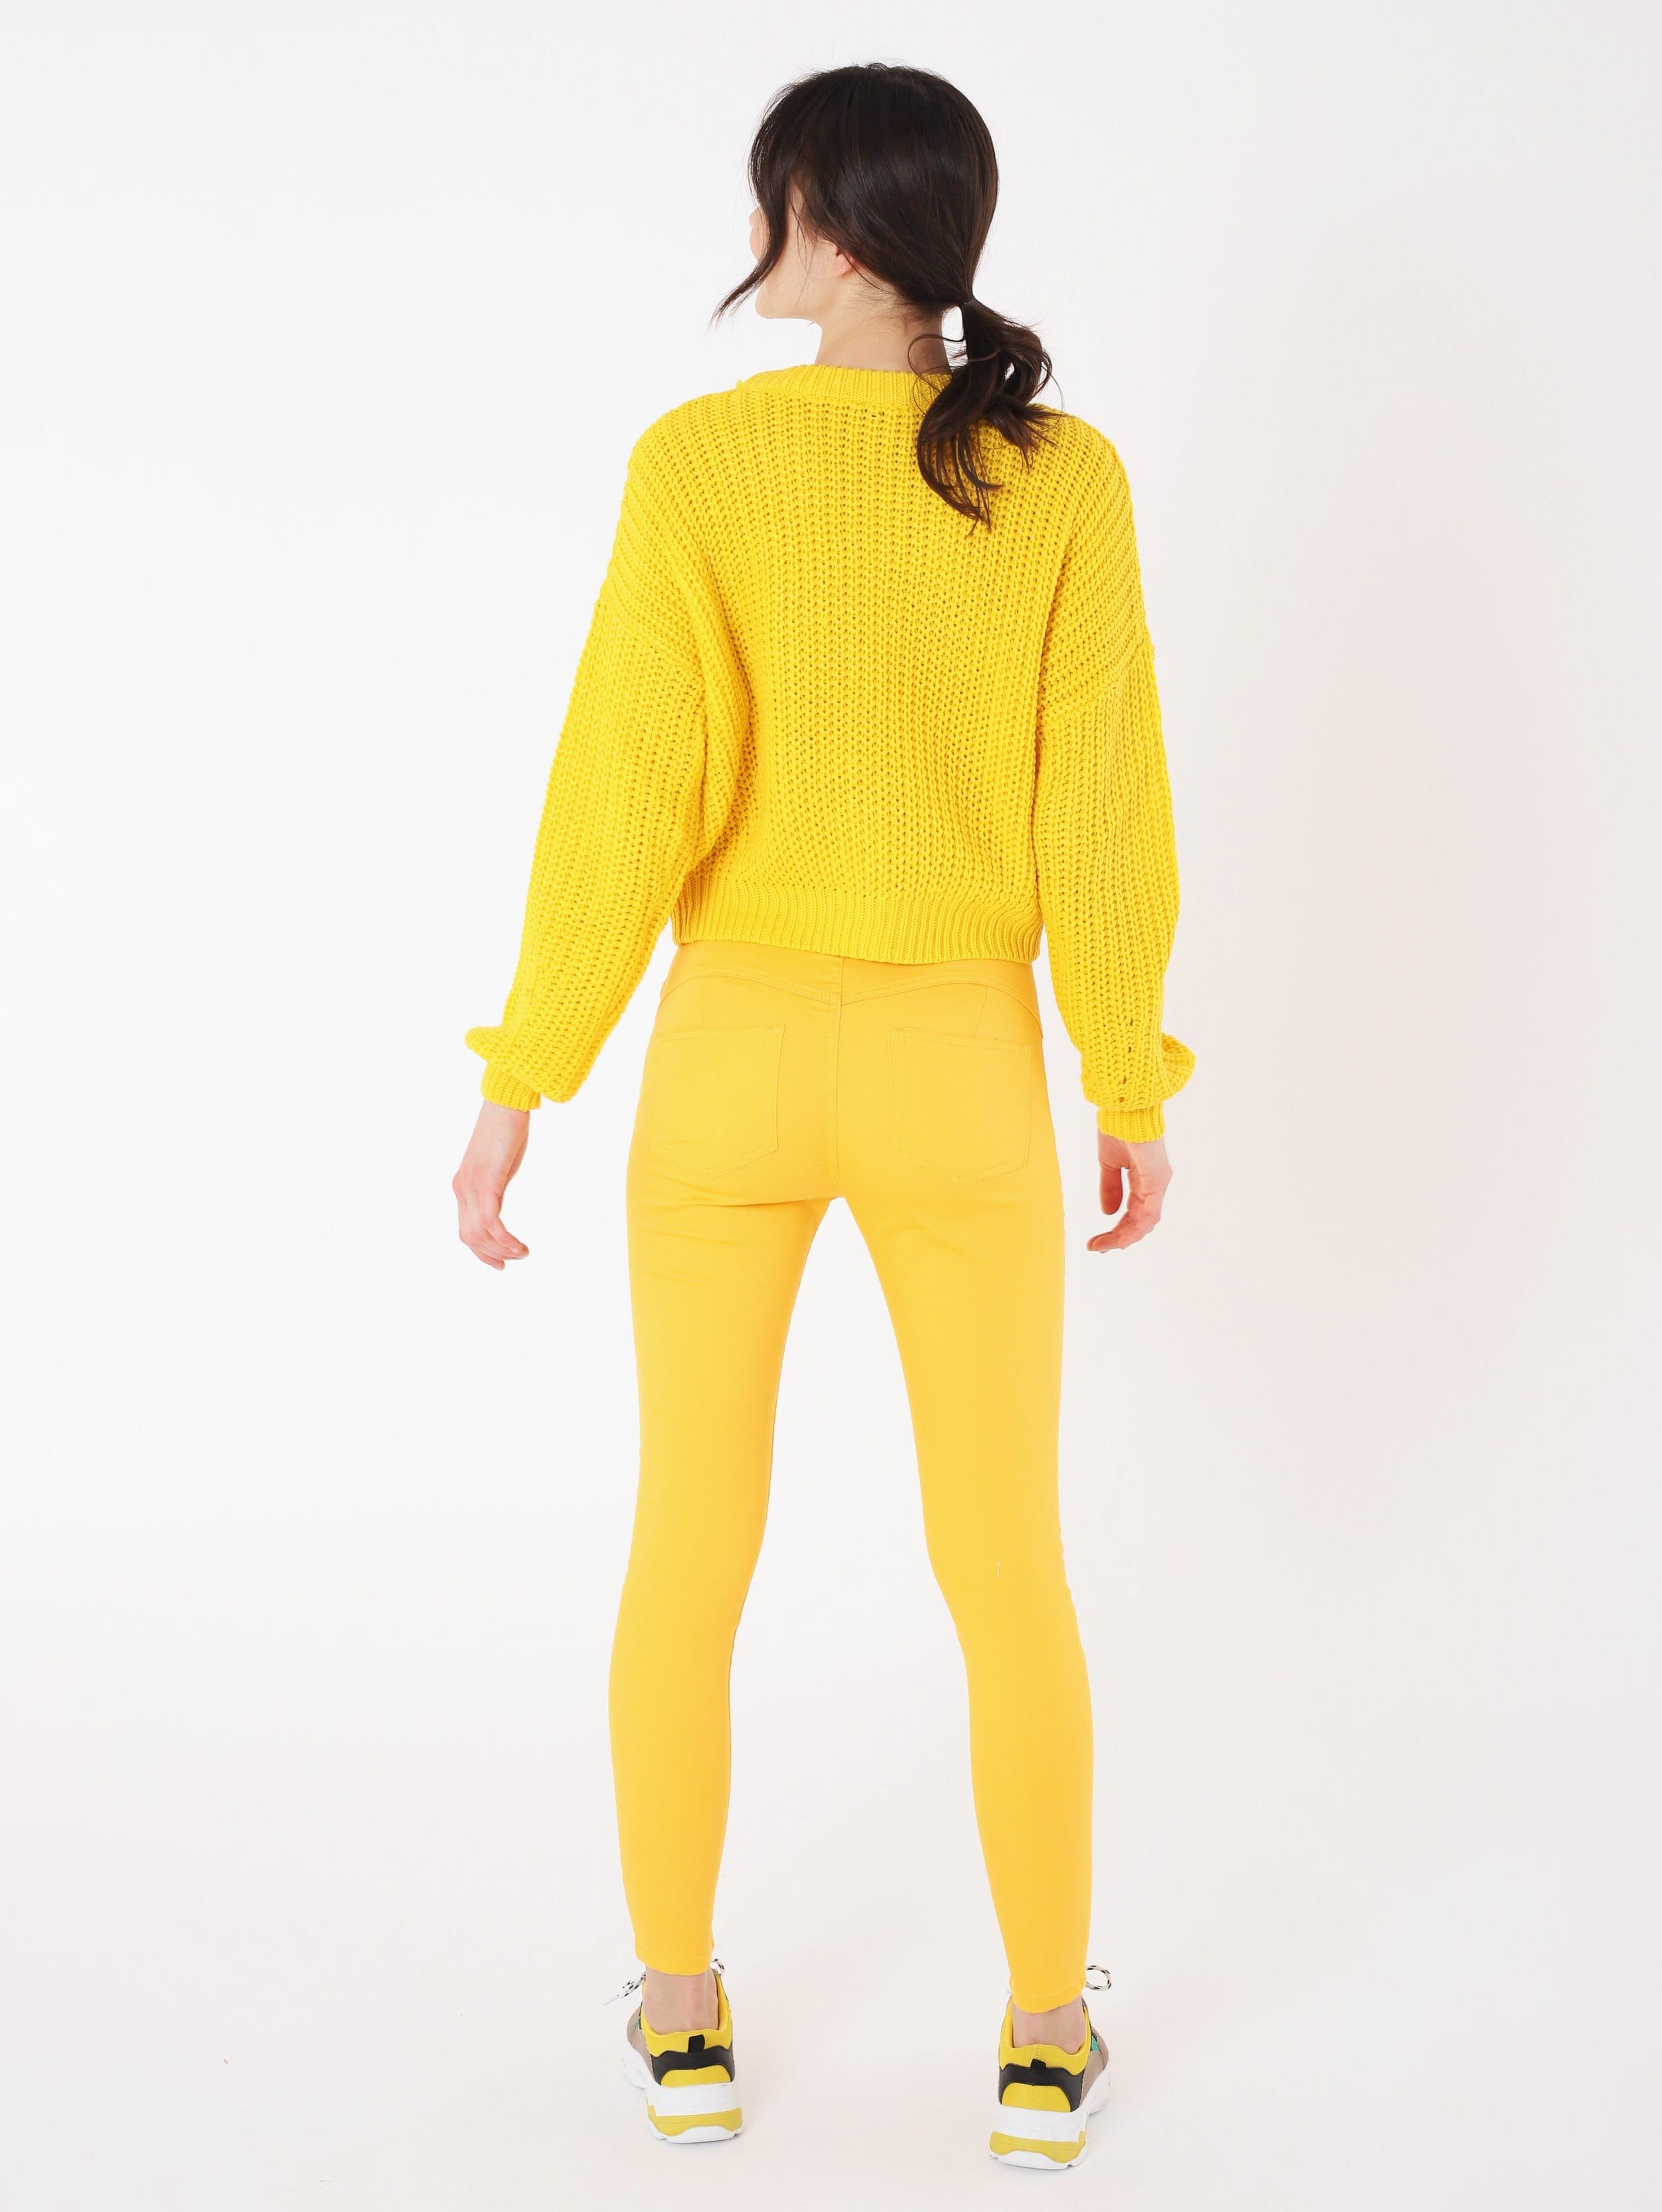 Yellow Sun Person Logo - I like this color trousers yellow sun